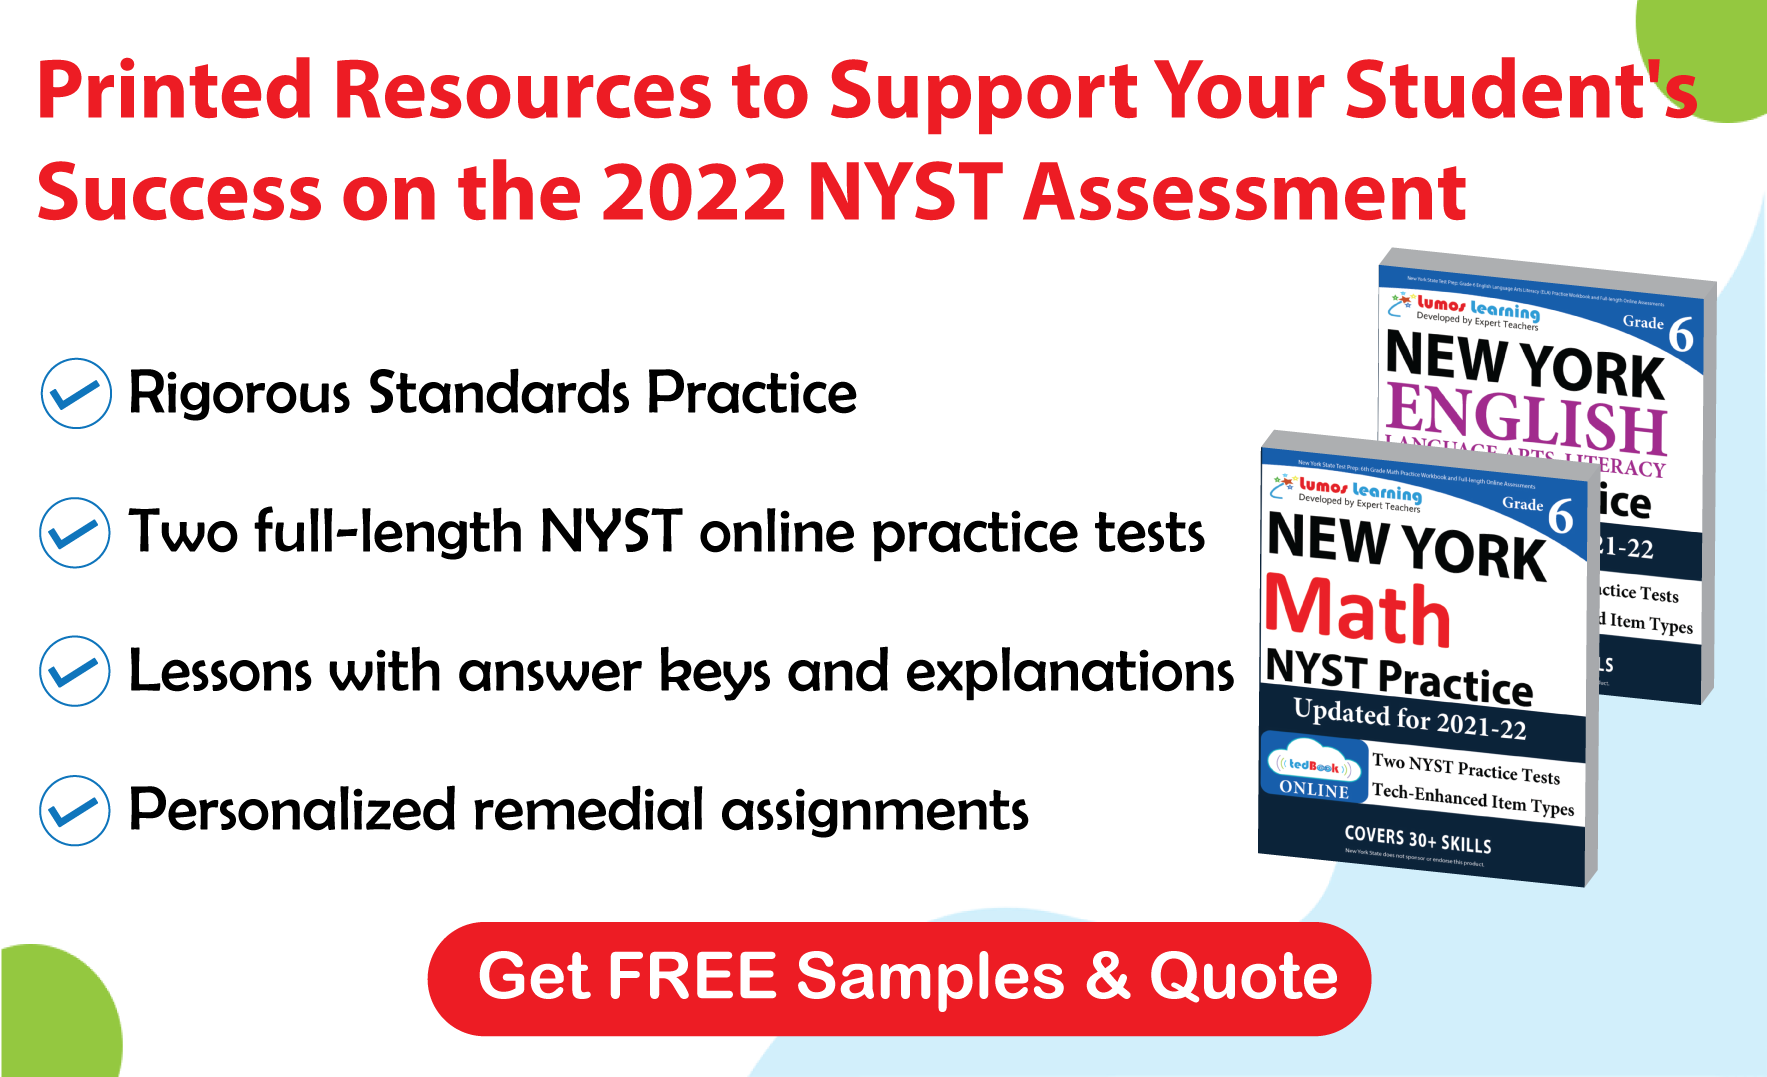 Lumos tedBook™ offers both Math and ELA printed workbooks, that are specifically designed to improve student achievement and help them succeed on the NYST Assessments.